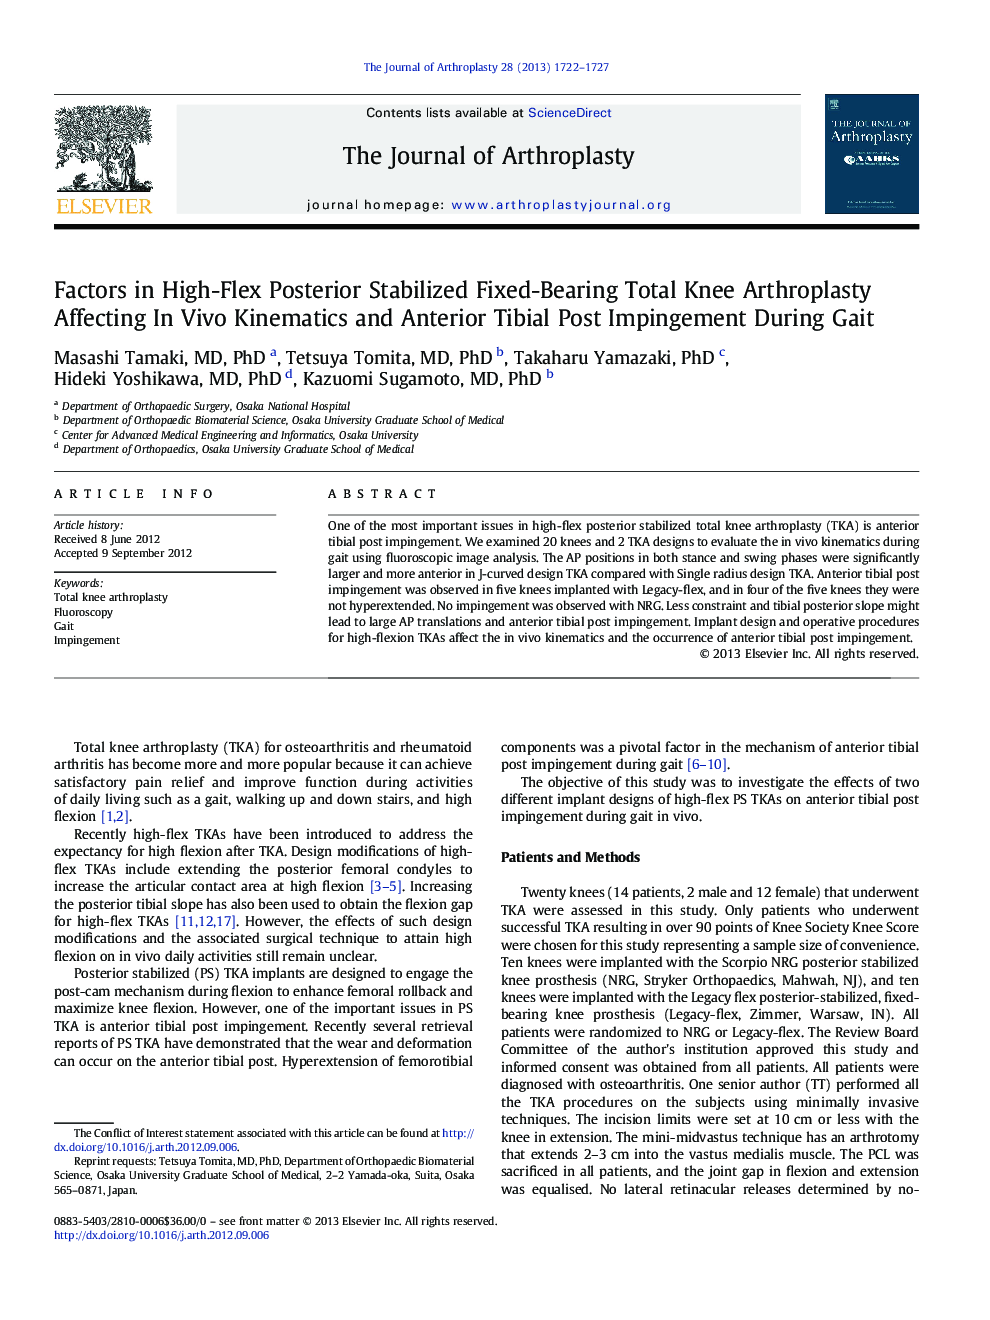 Factors in High-Flex Posterior Stabilized Fixed-Bearing Total Knee Arthroplasty Affecting In Vivo Kinematics and Anterior Tibial Post Impingement During Gait